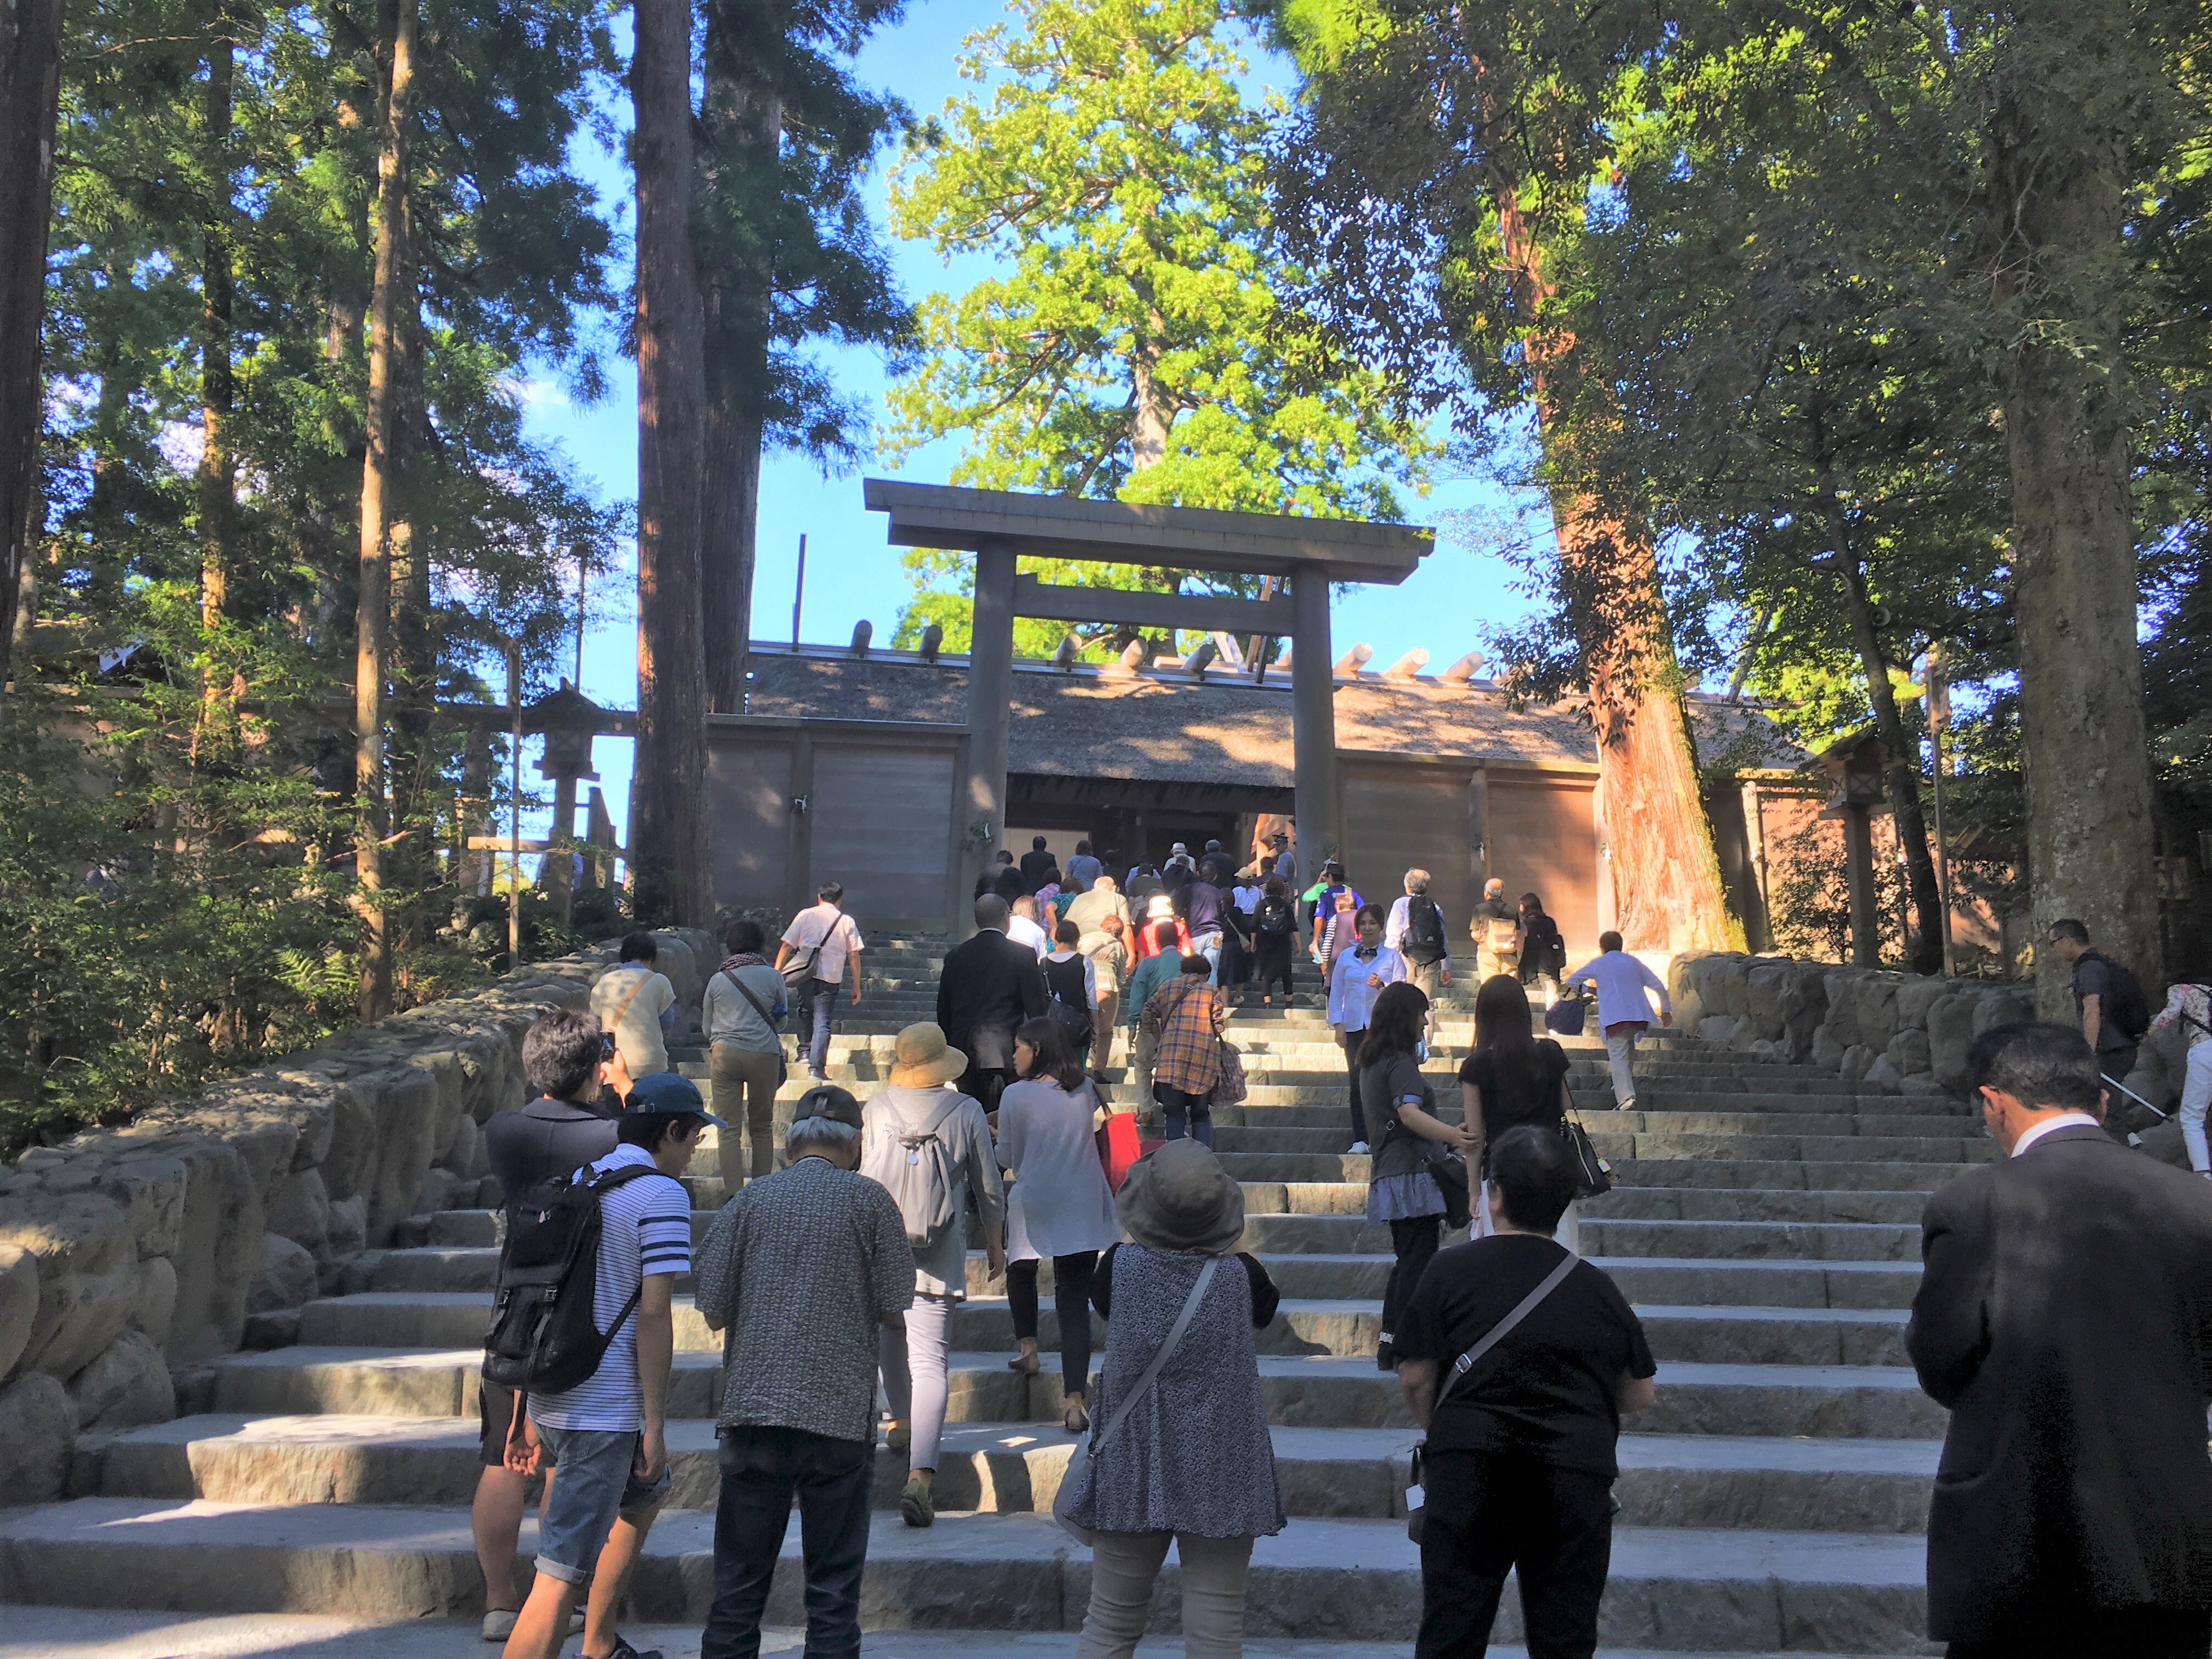 shogu, inner shrine, of ise jingu and stones steps leading up to wooden shrine structure